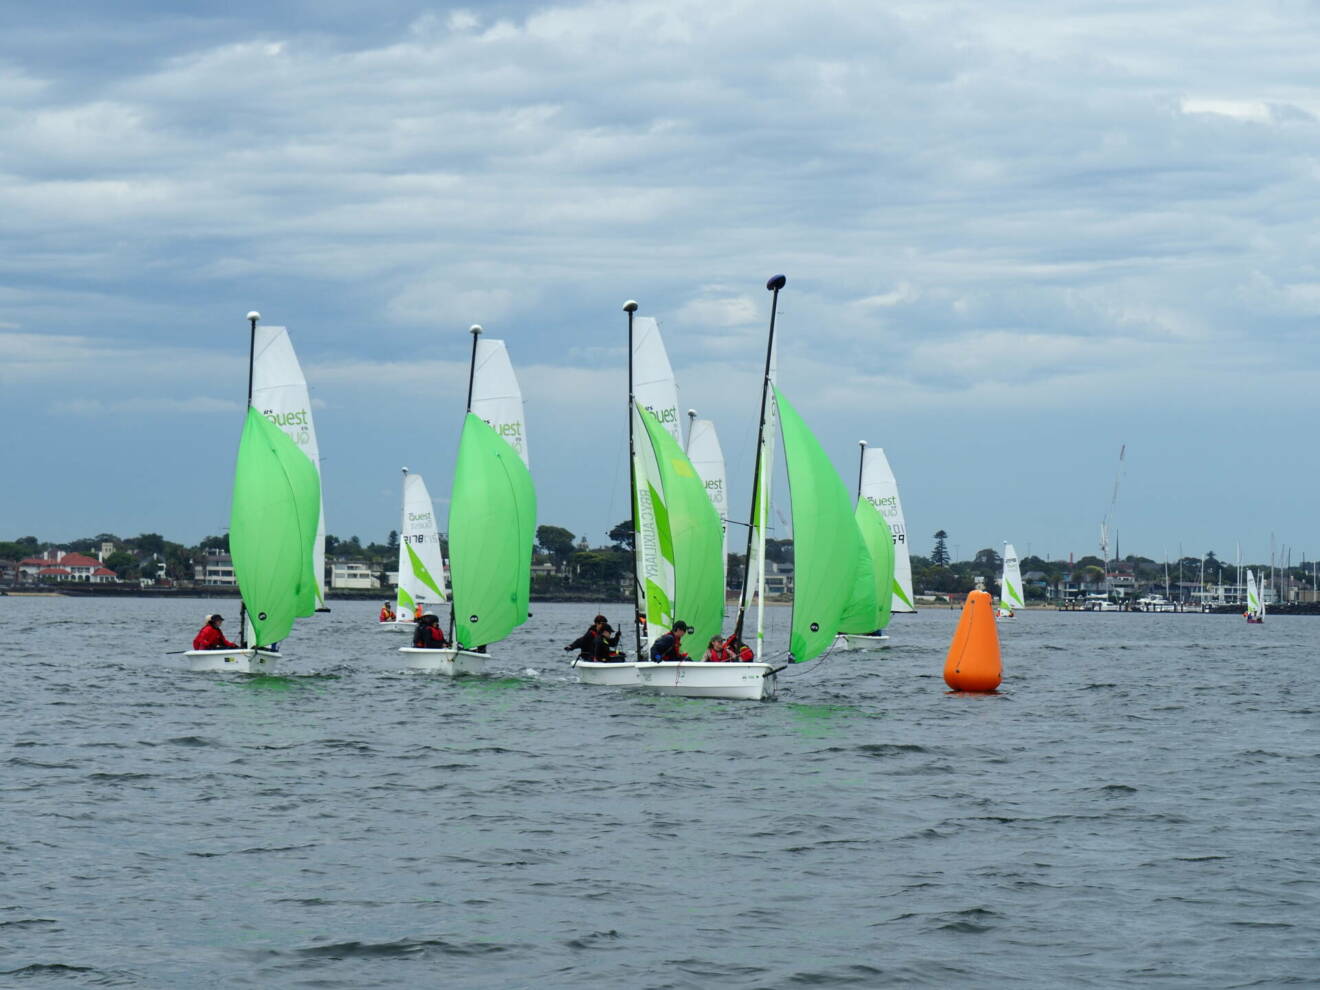 Reflections from the Stonehaven Cup regatta